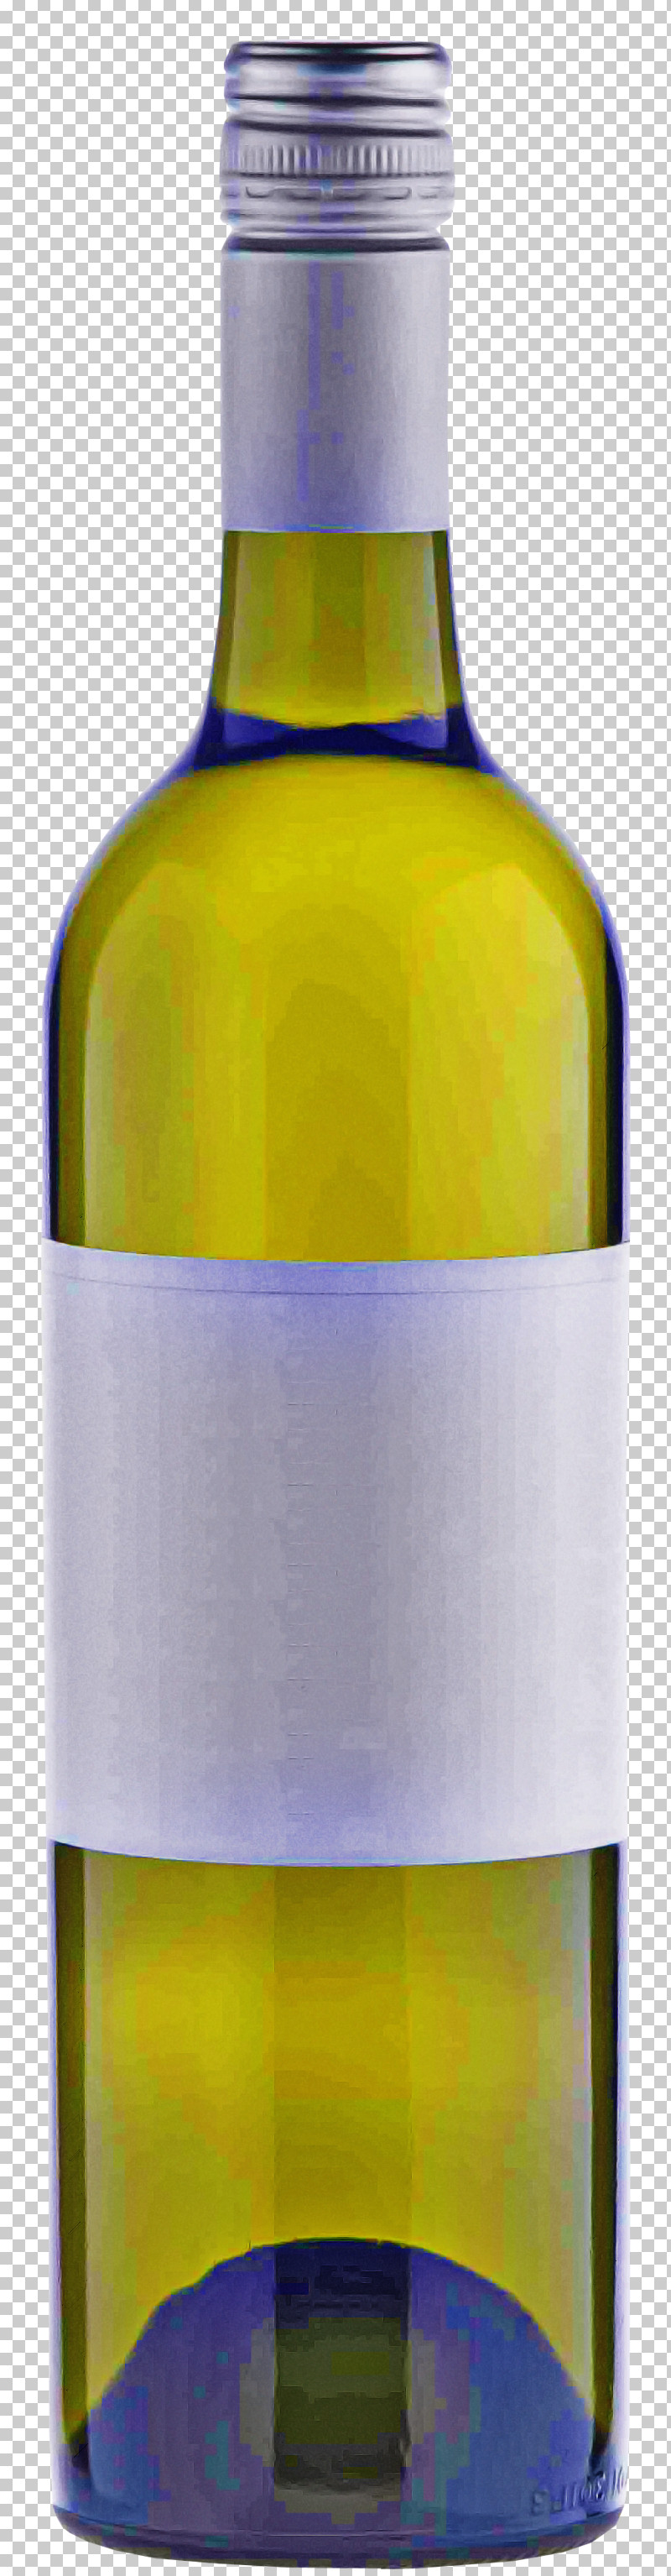 Glass Bottle White Wine Wine Bottle Wine Bottle PNG, Clipart, Bottle, Glass, Glass Bottle, Liquidm Inc, White Wine Free PNG Download